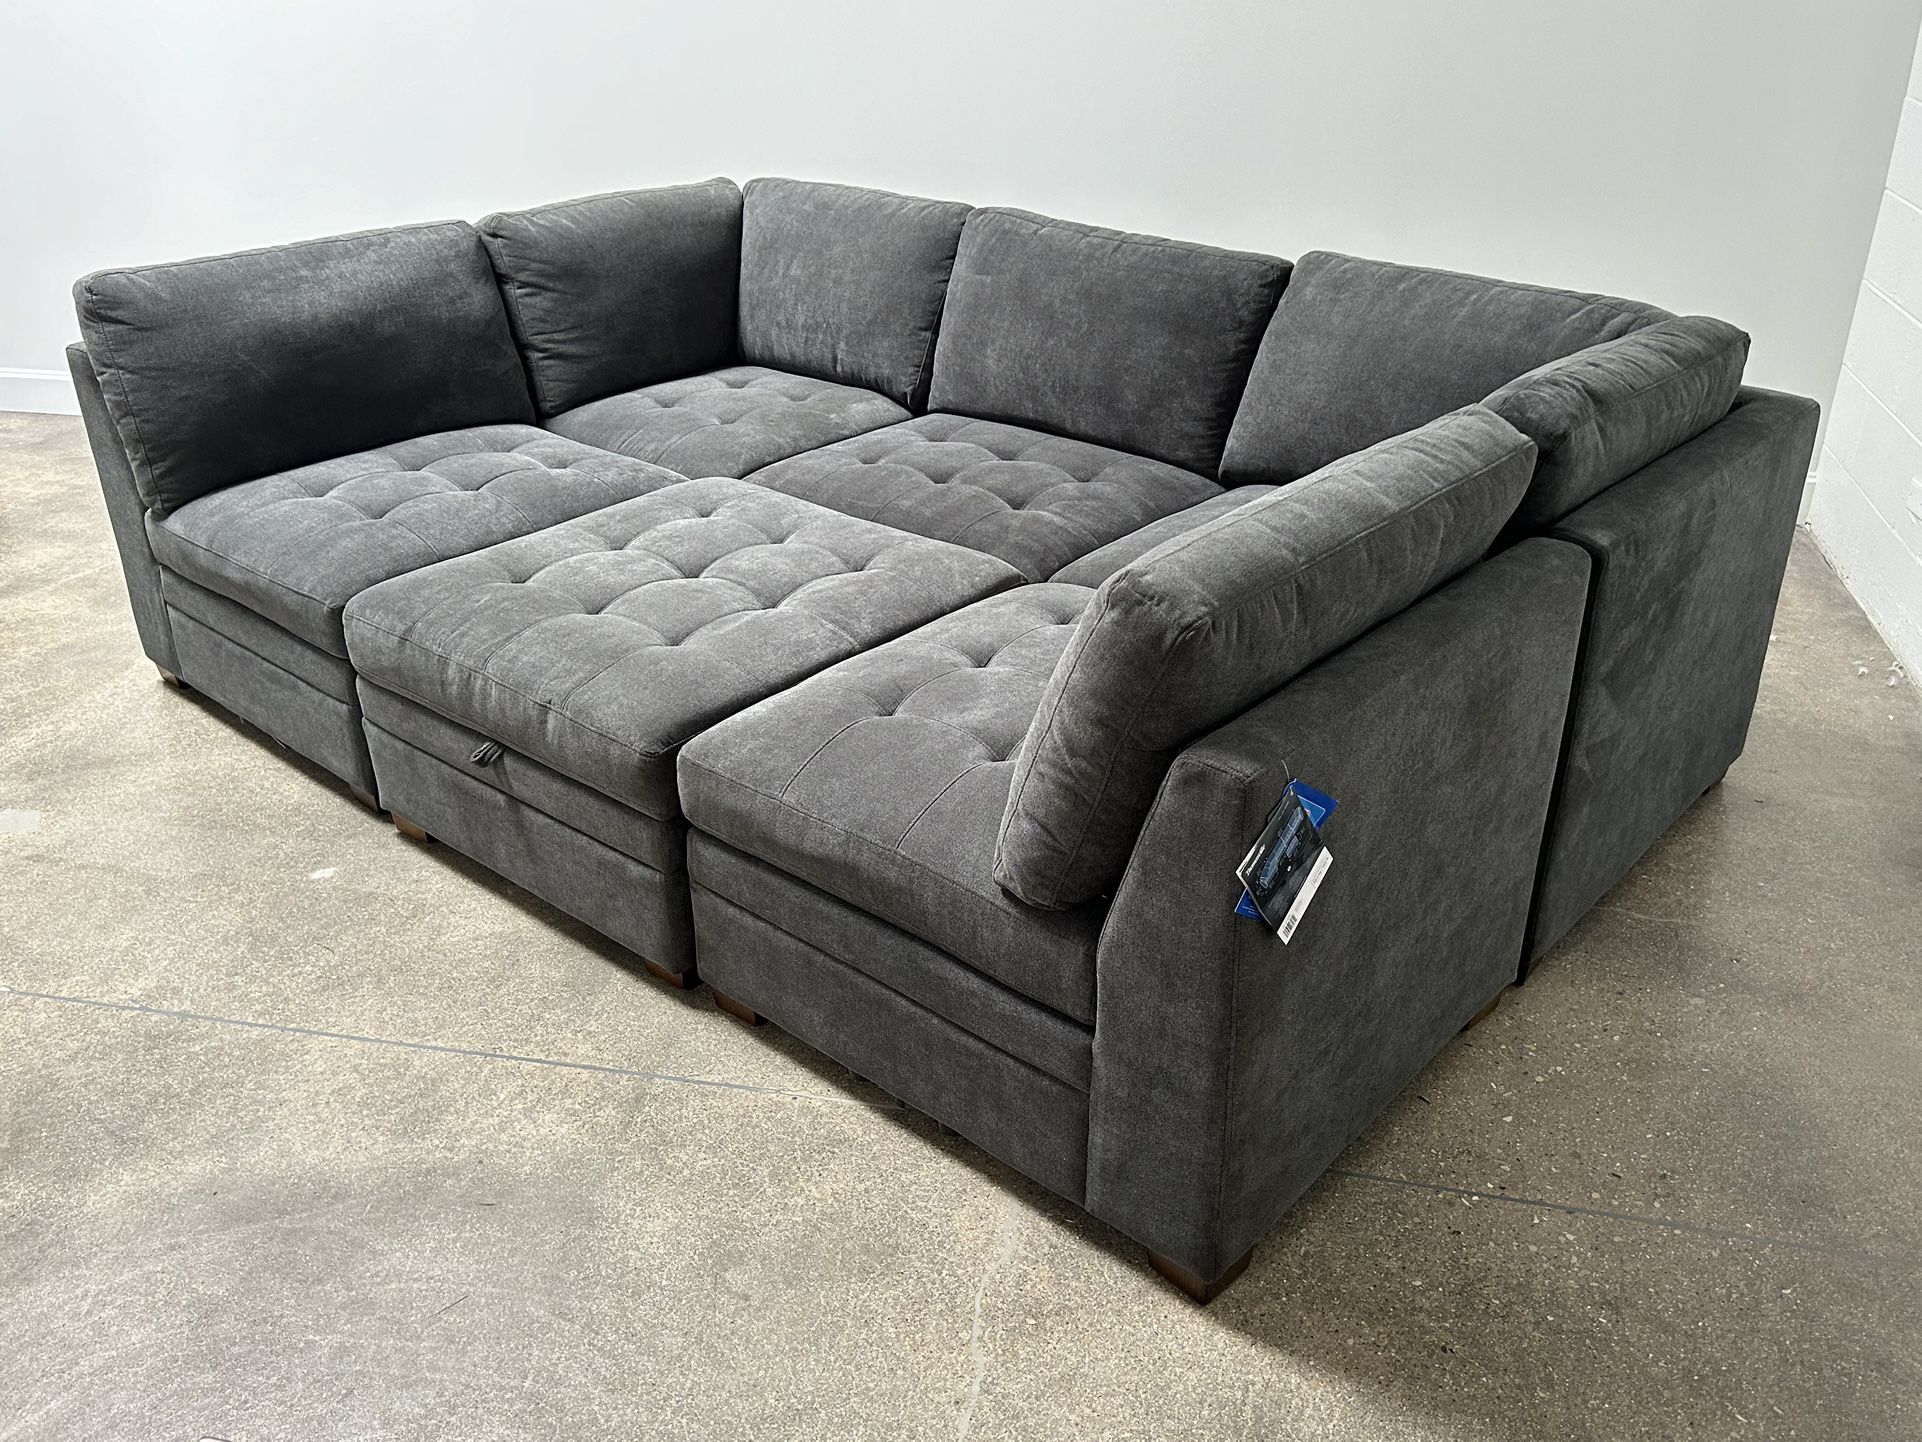 Thomasville 6-Pc Modular Sectional Couch